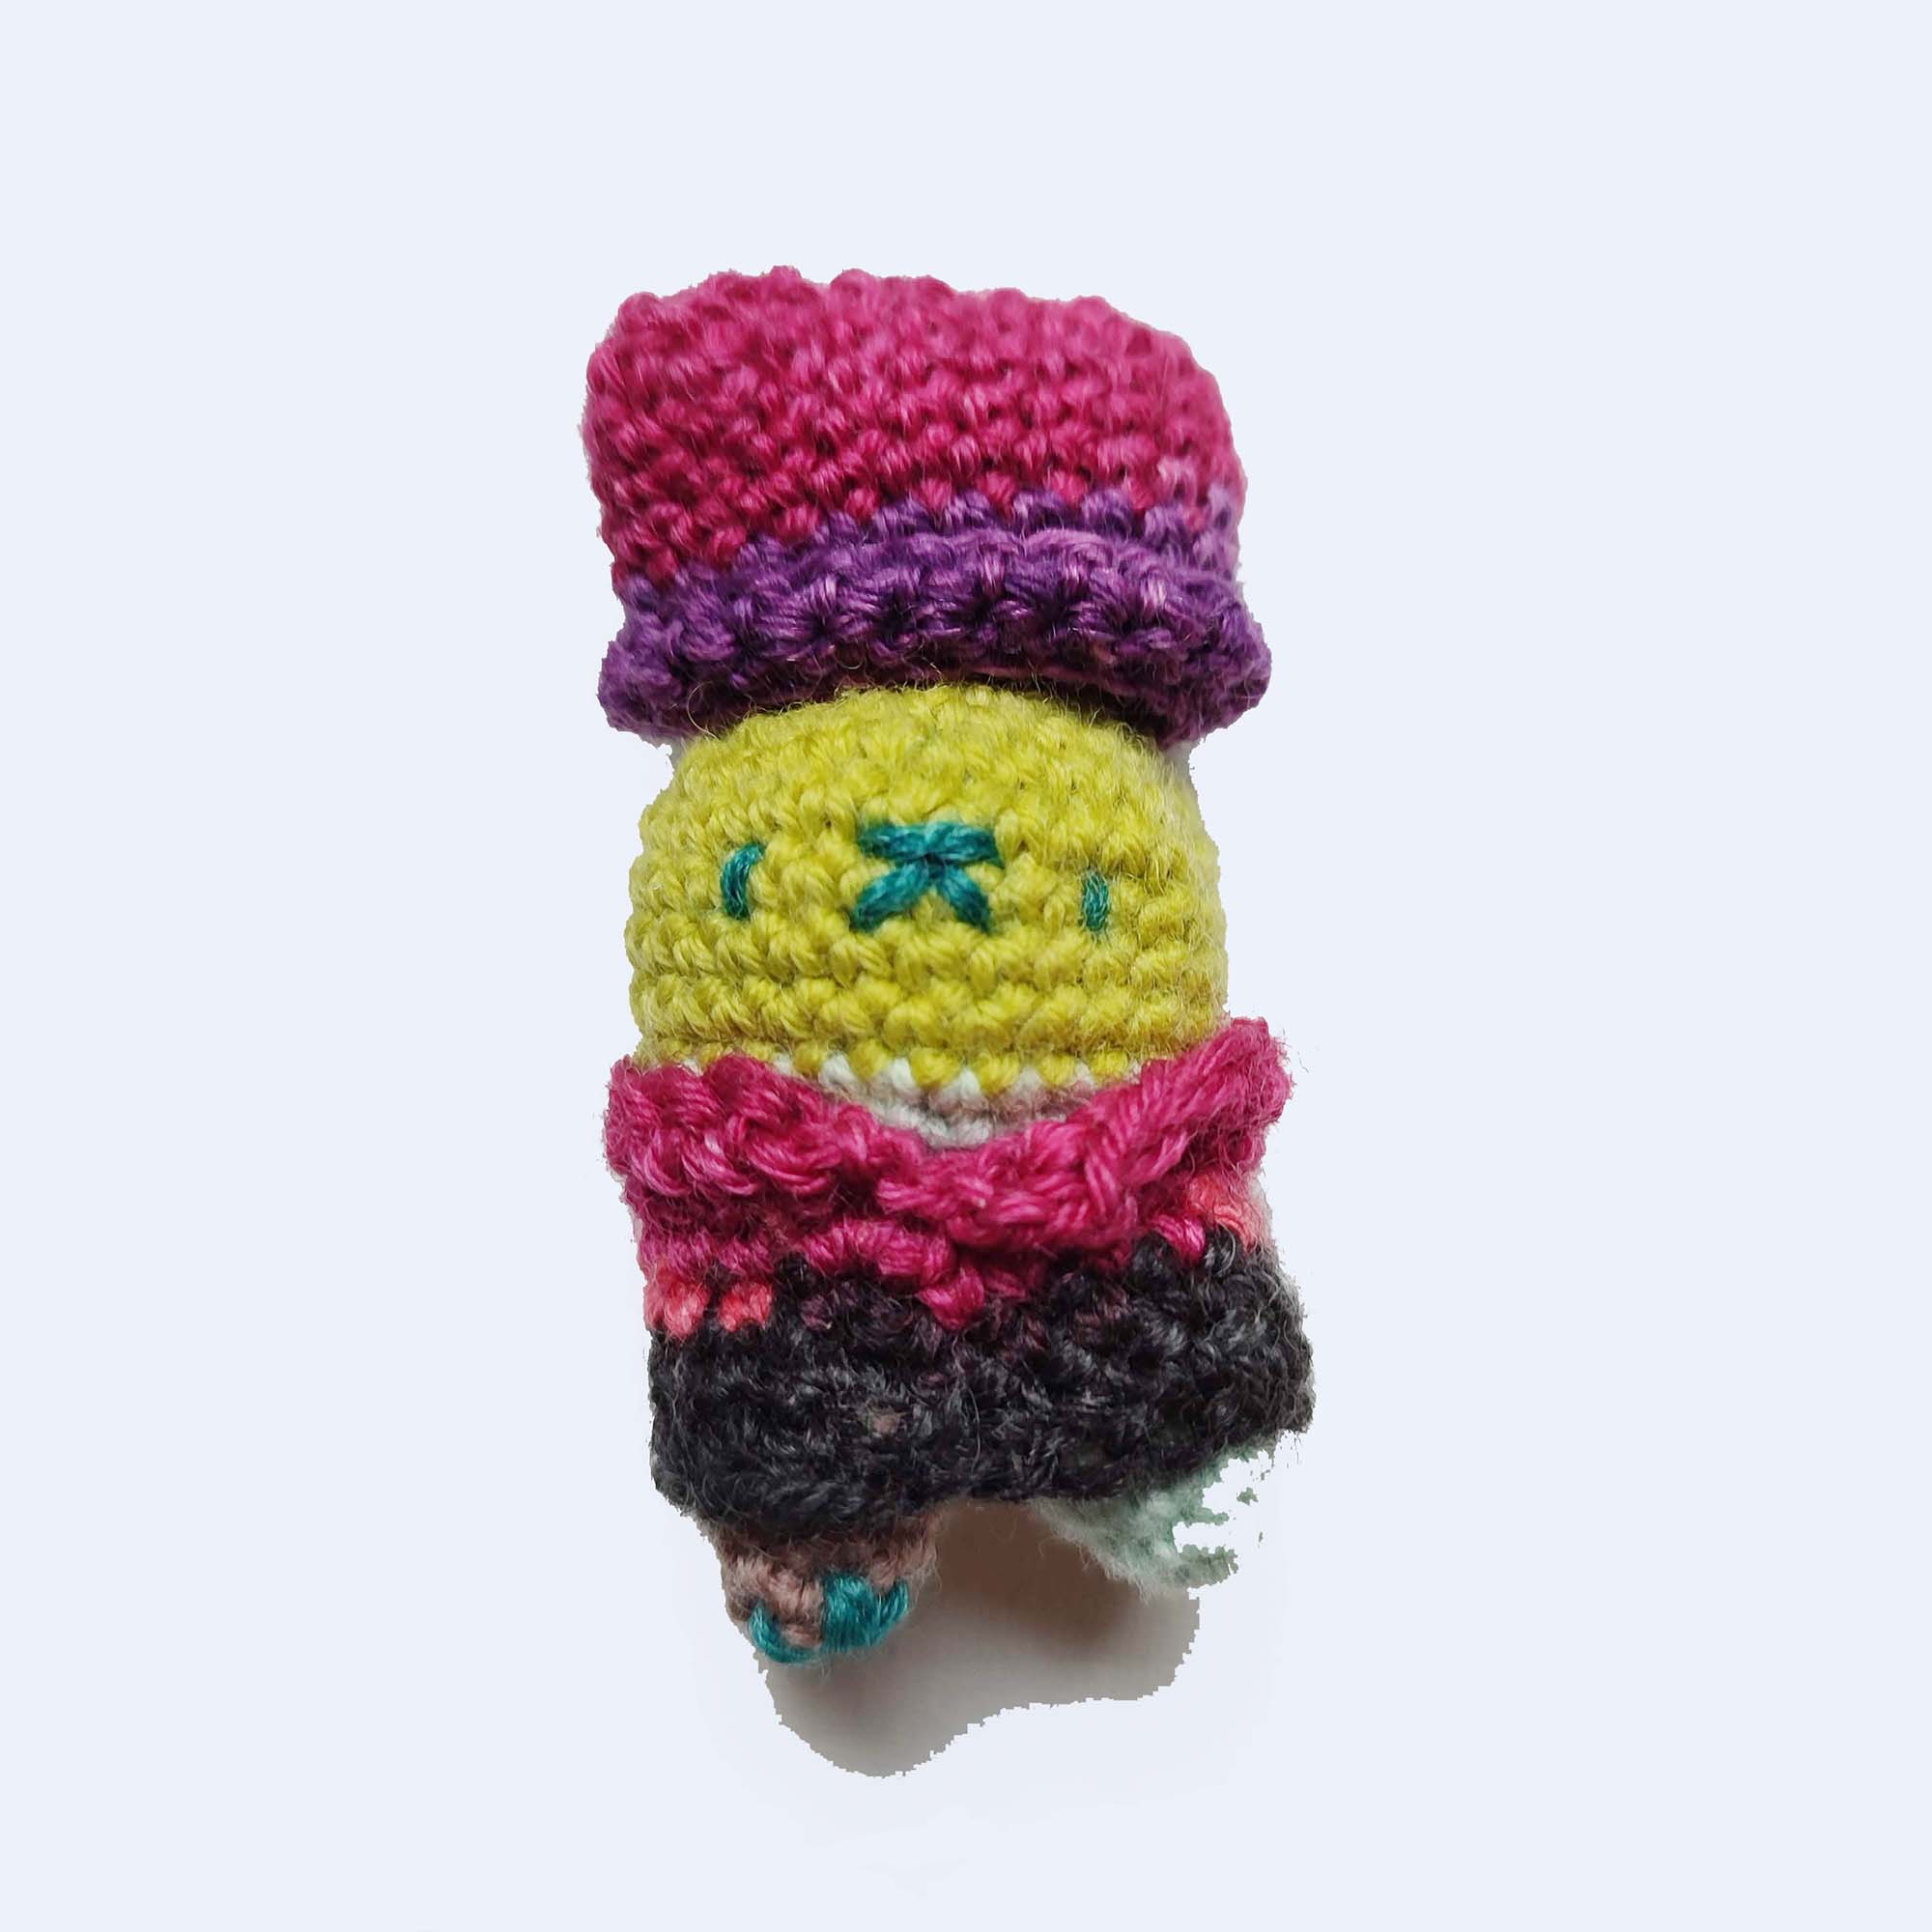 light green colored crocheted toy bun alien wearing a red hat and shirt